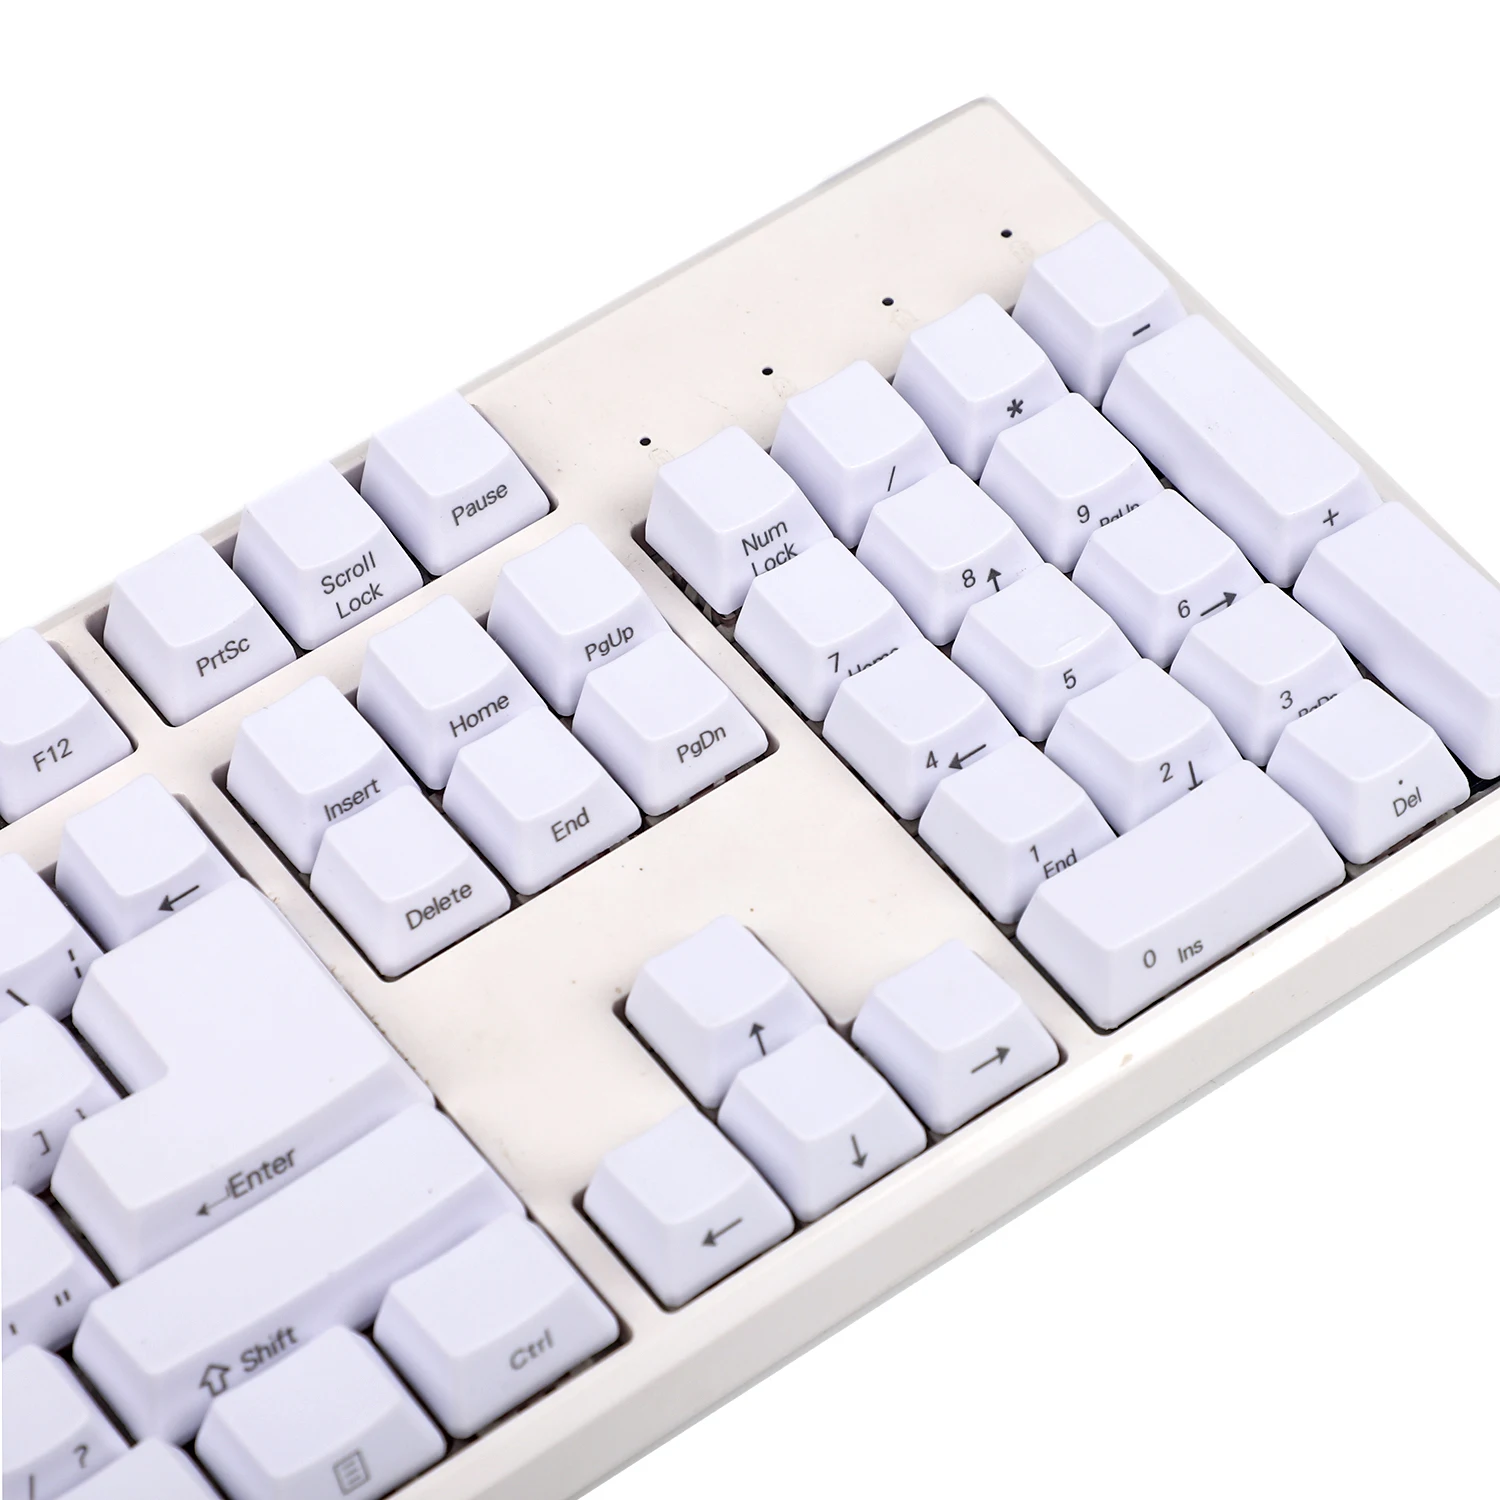 YMDK Thick PBT Dolch OEM Profile Russian Keycap Keyset Suitable For Steelseries 6GV2 7G 3 - Pudding Keycap